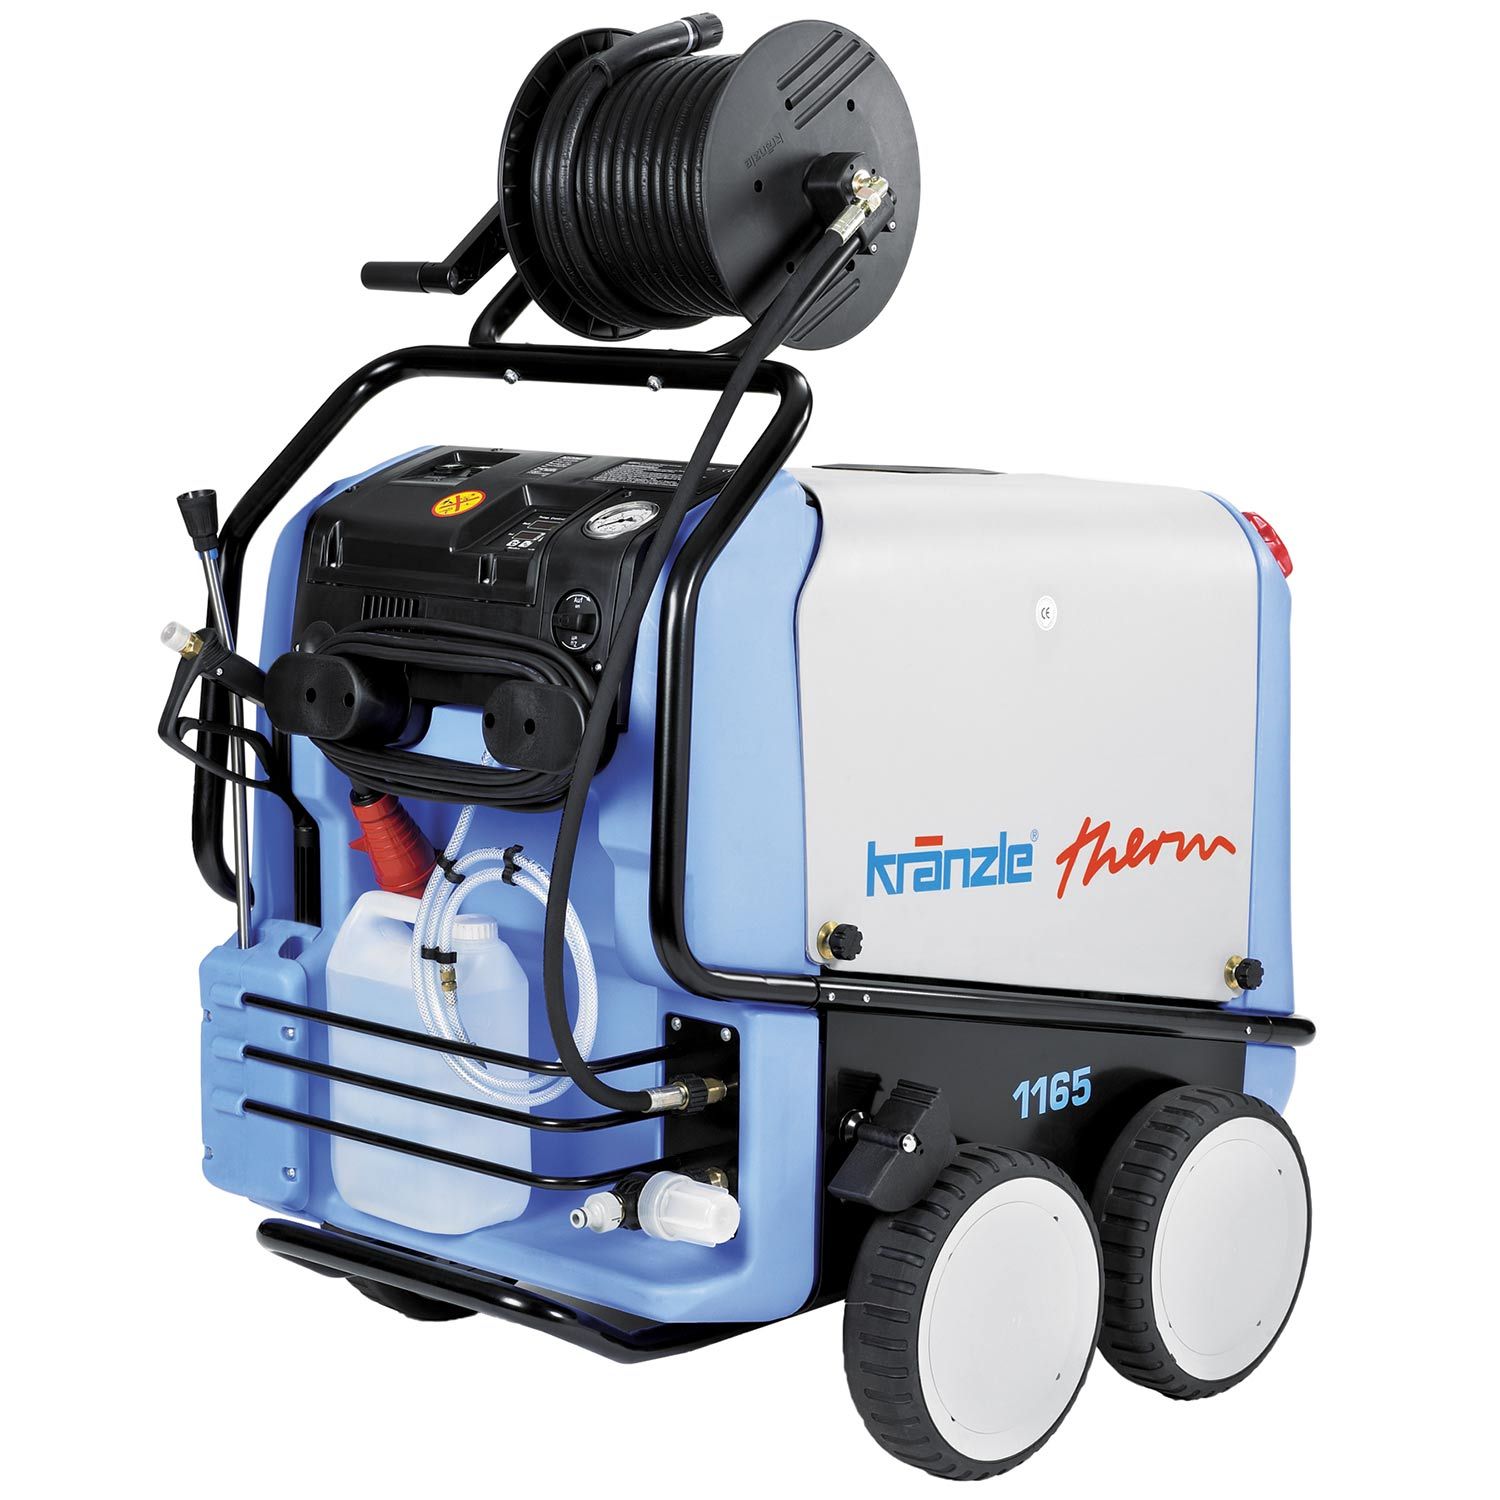 New 10 metre kranzle hot water therm pressure washer 